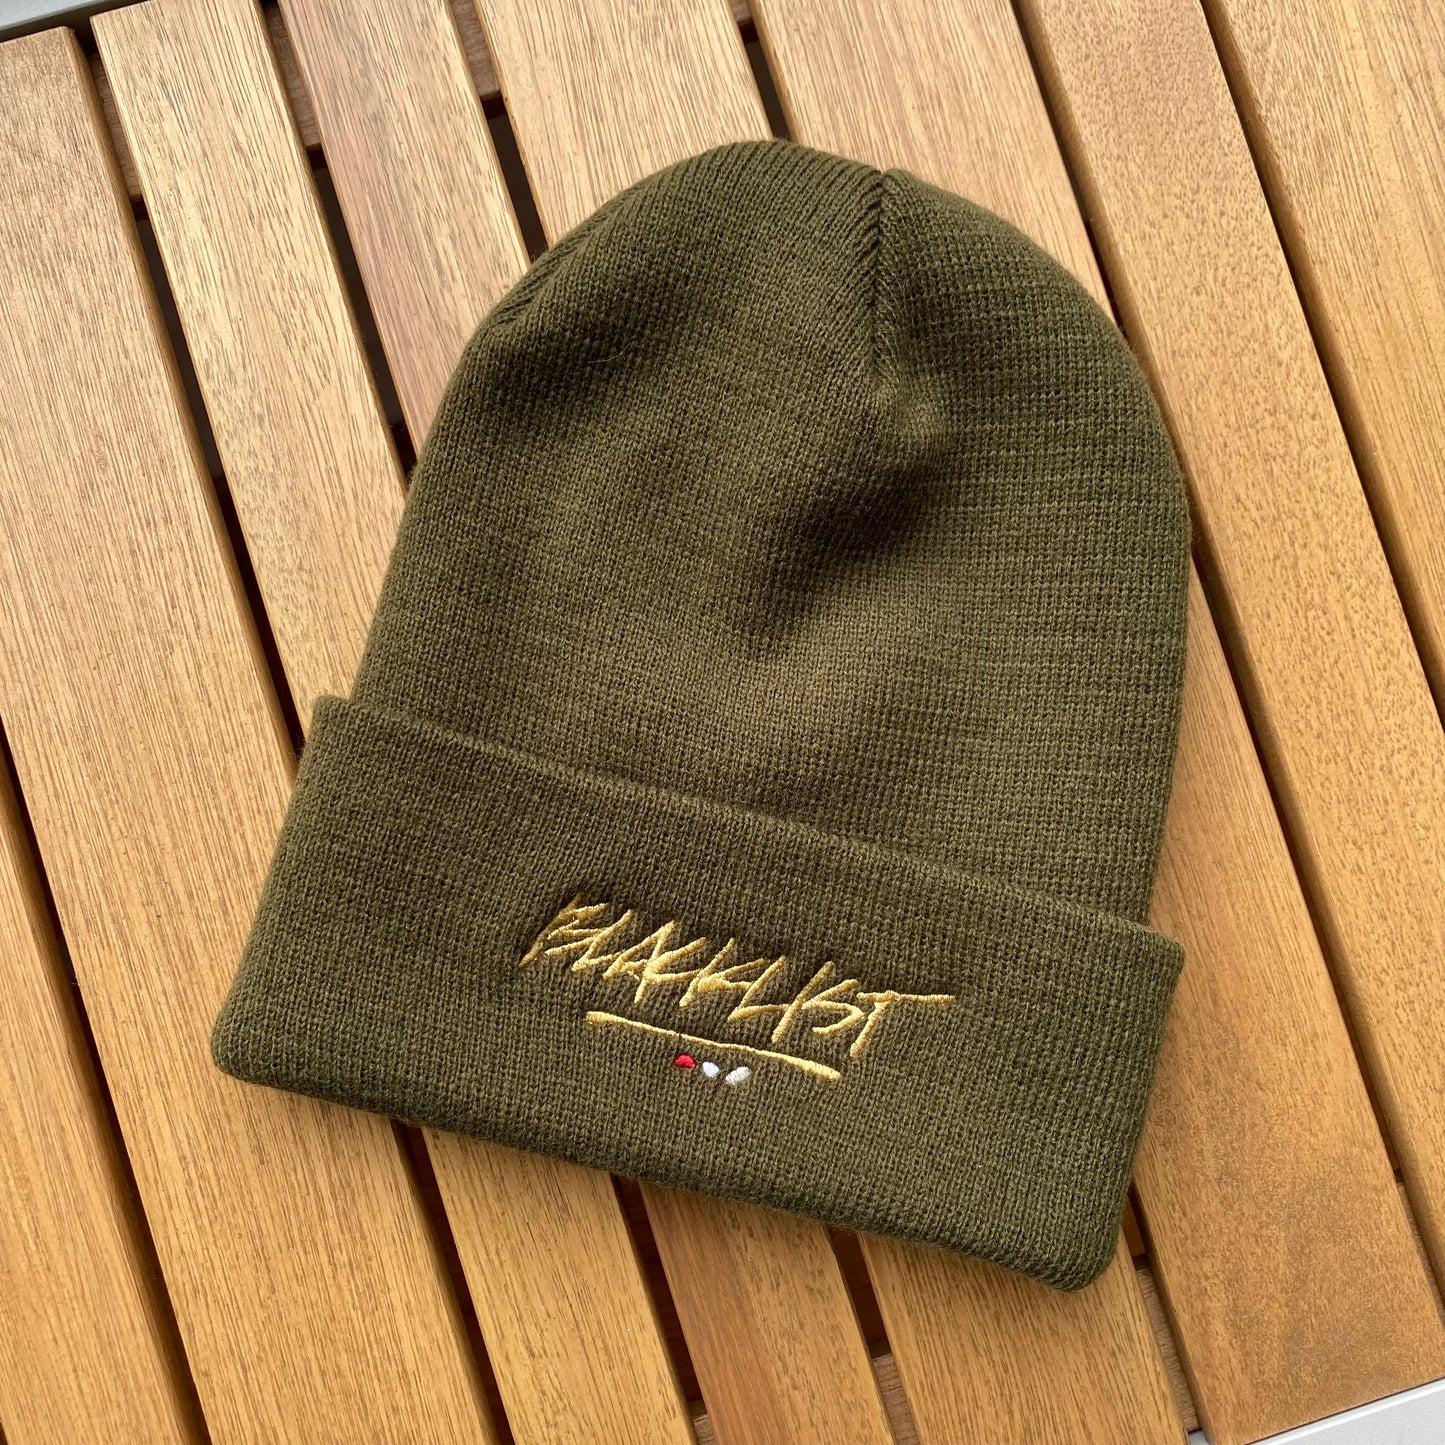 3 DOT EMBROIDERED BEANIE